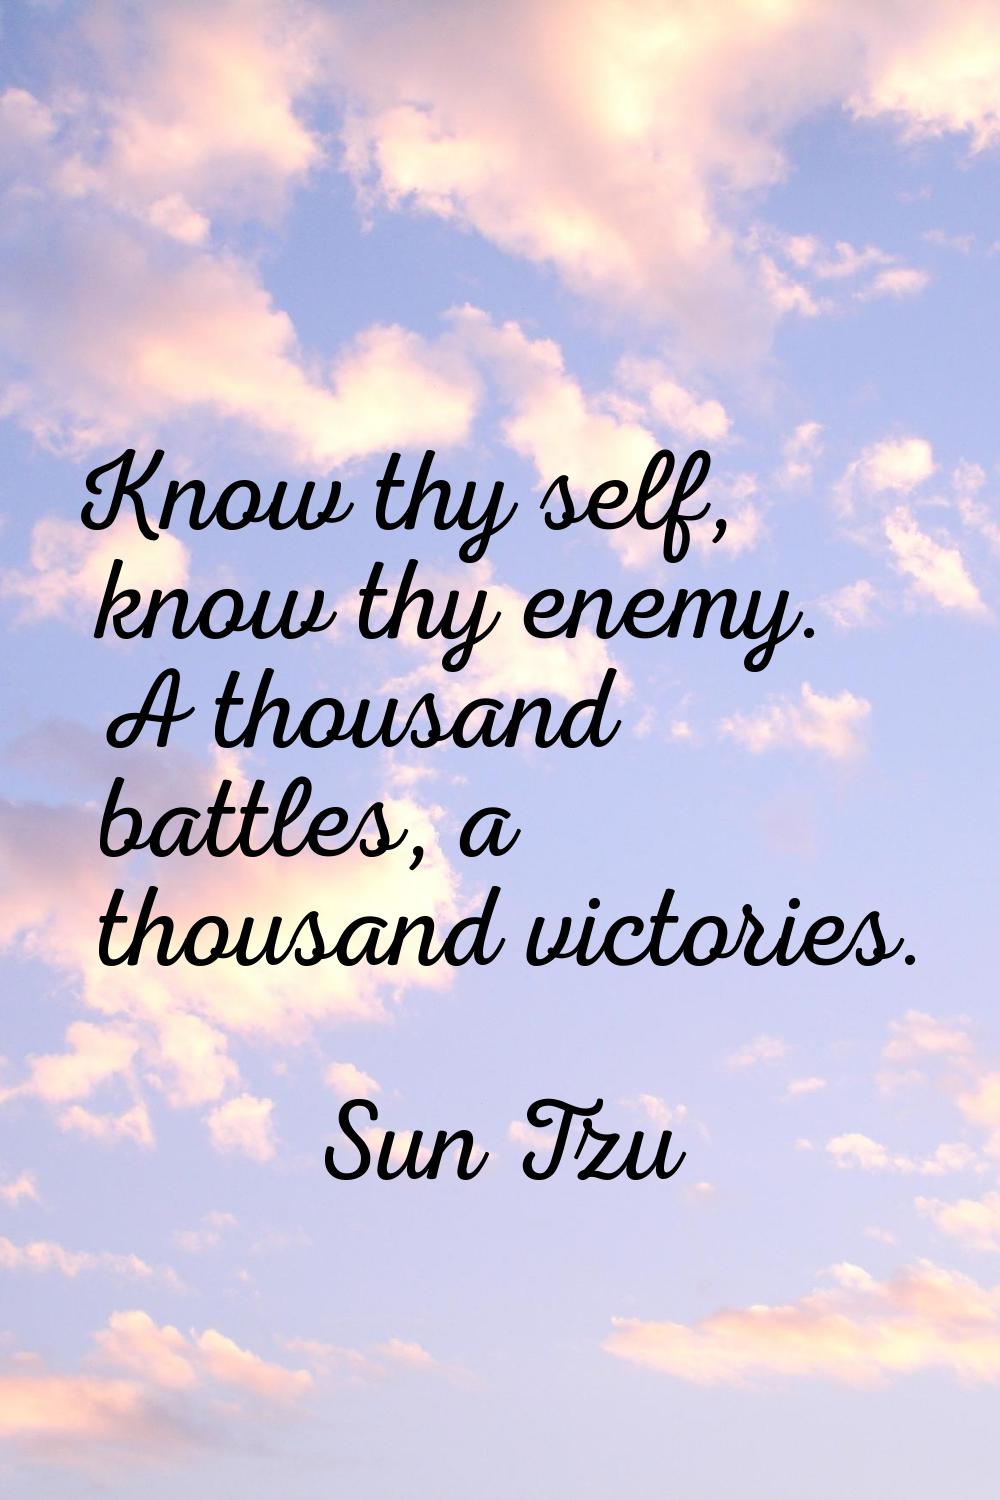 Know thy self, know thy enemy. A thousand battles, a thousand victories.